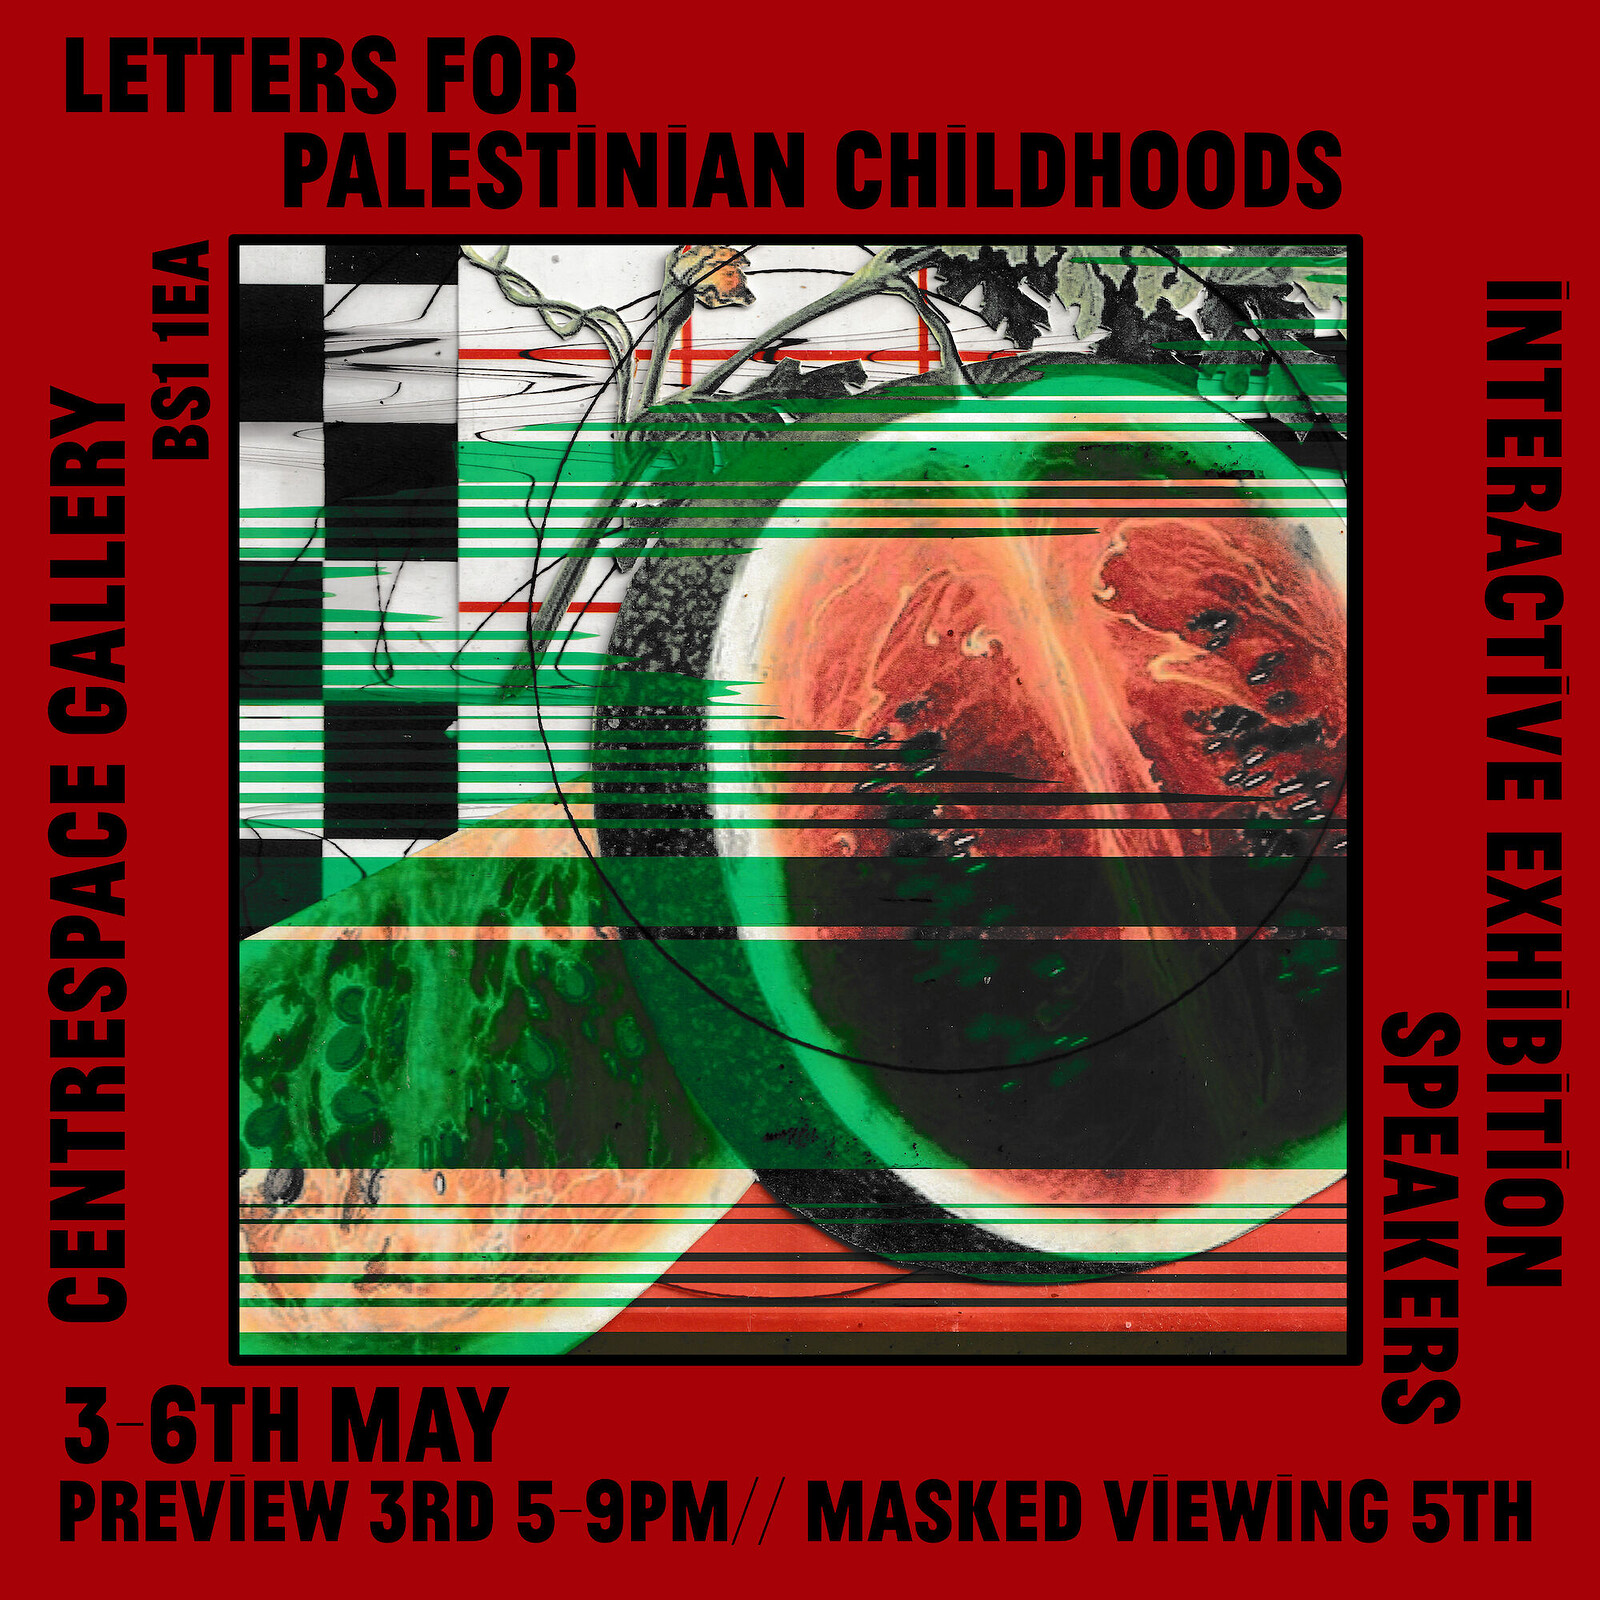 Letters for Palestinian Childhoods at Centrespace Gallery